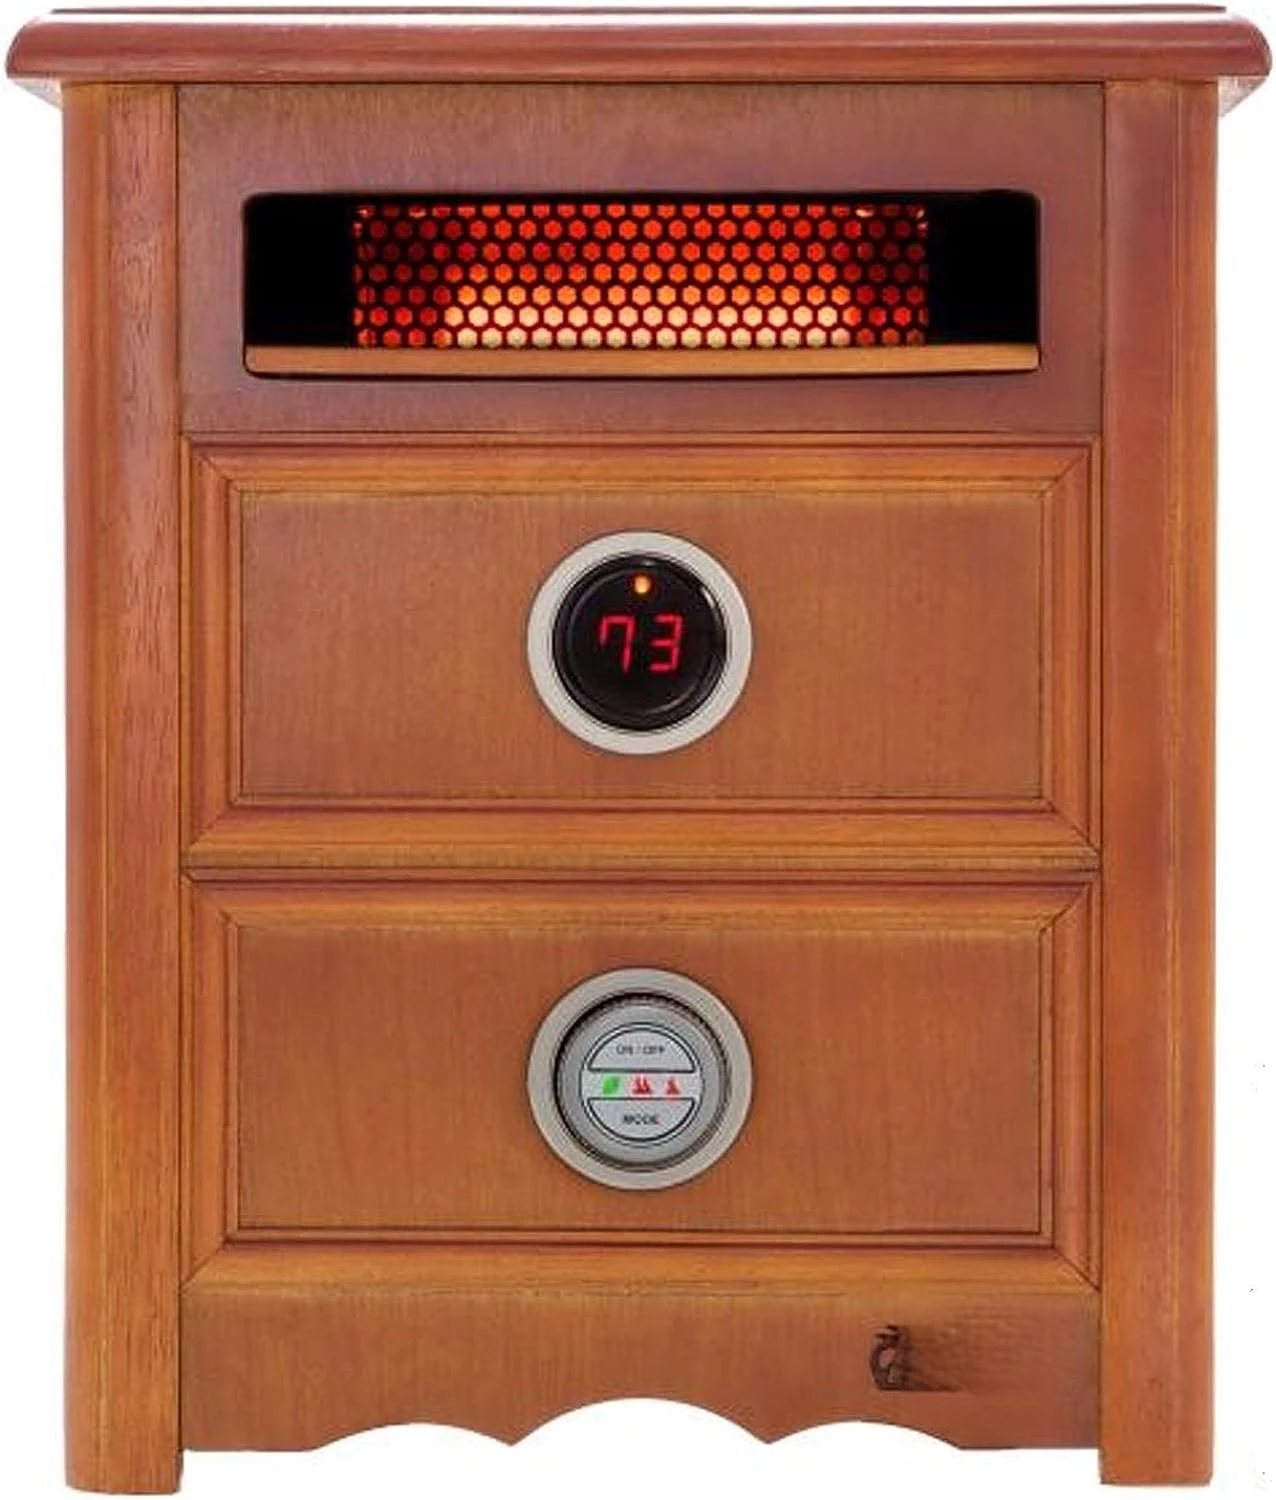 

Heater DR999, 1500W, Advanced Dual Heating System with Nightstand Design, Furniture-Grade Cabinet, Remote Control, Cherry Neck w